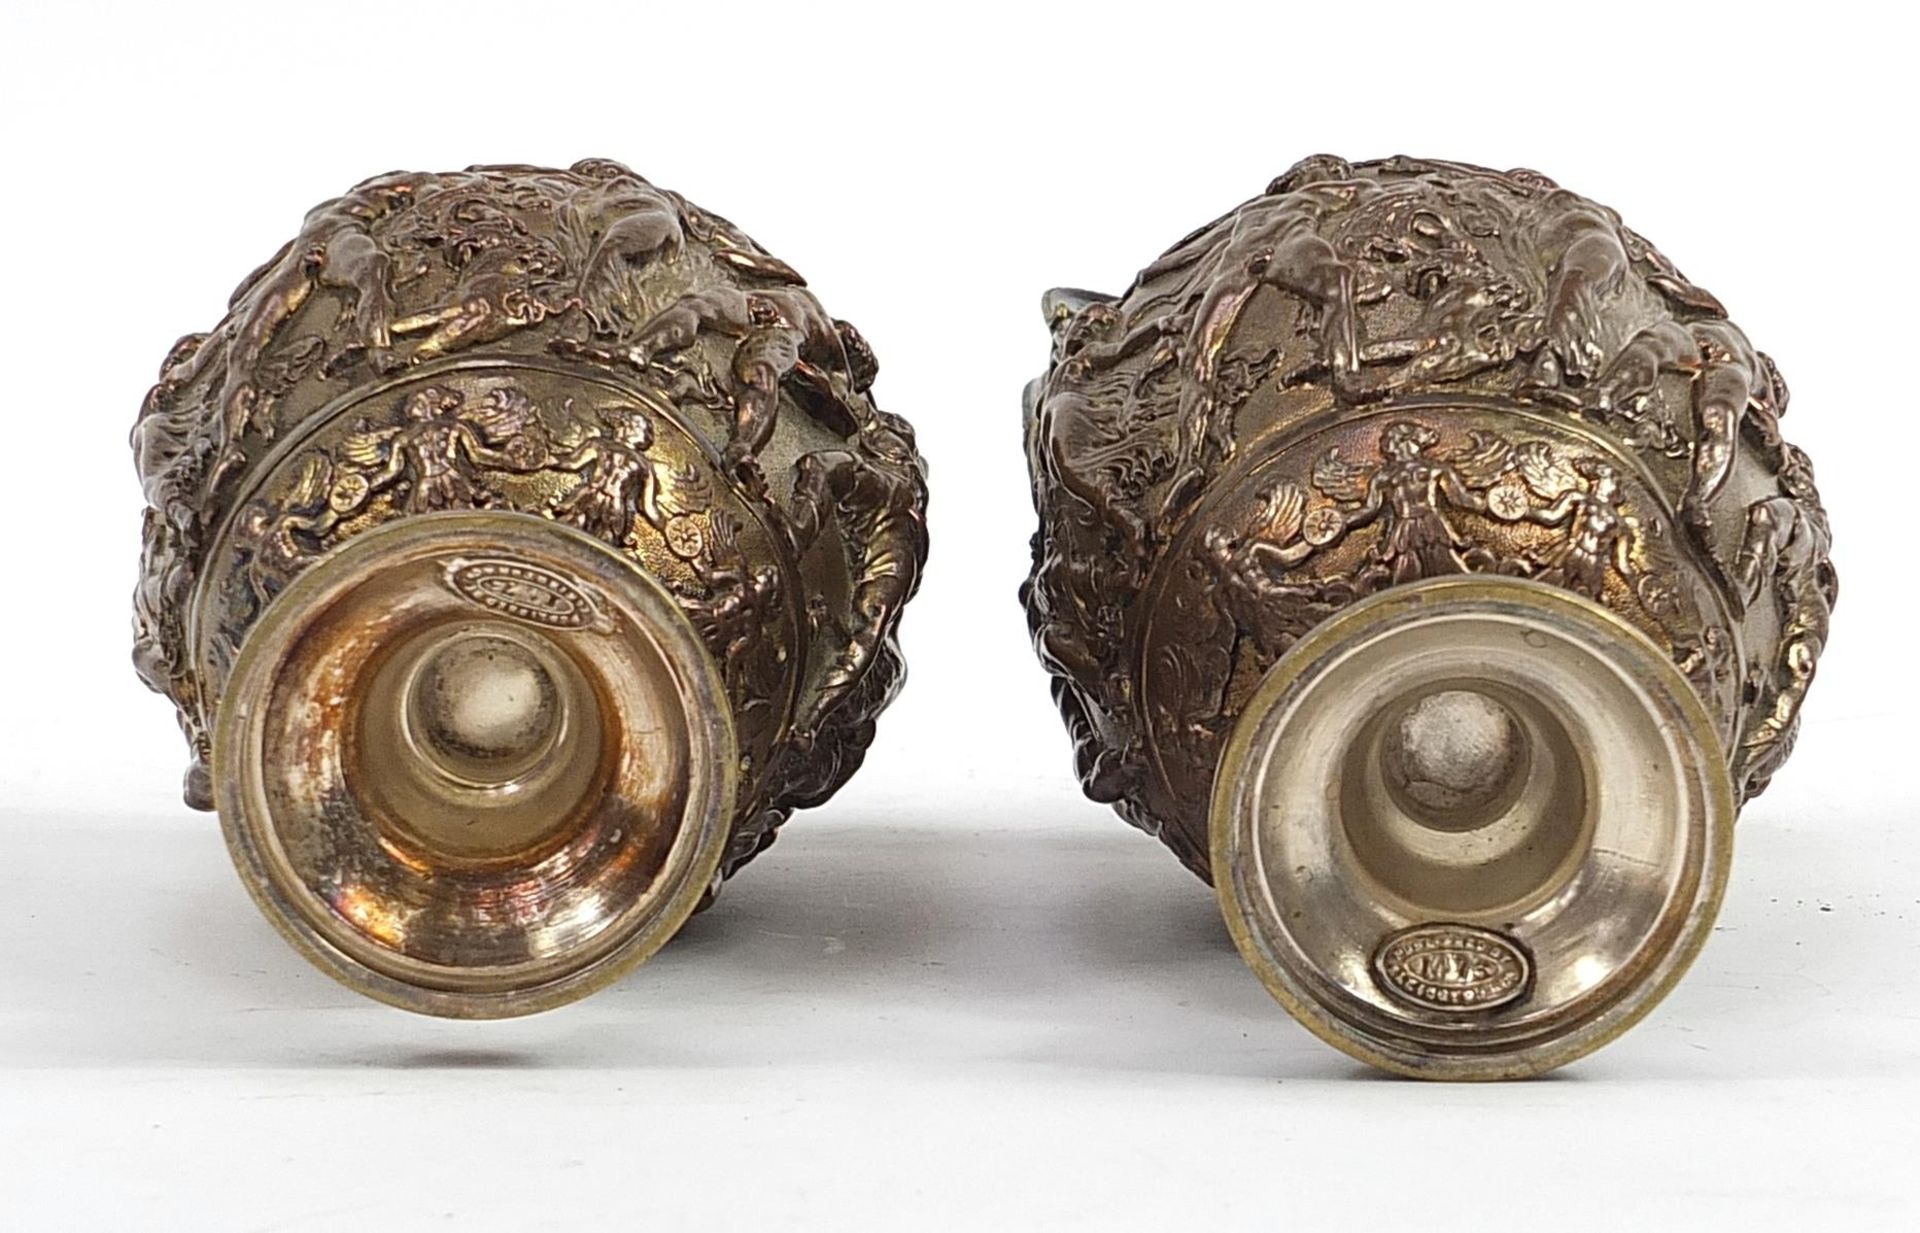 Pair of 19th century Elkington & Co silver plated Townley vases, each with plaques to the bases - Image 3 of 4